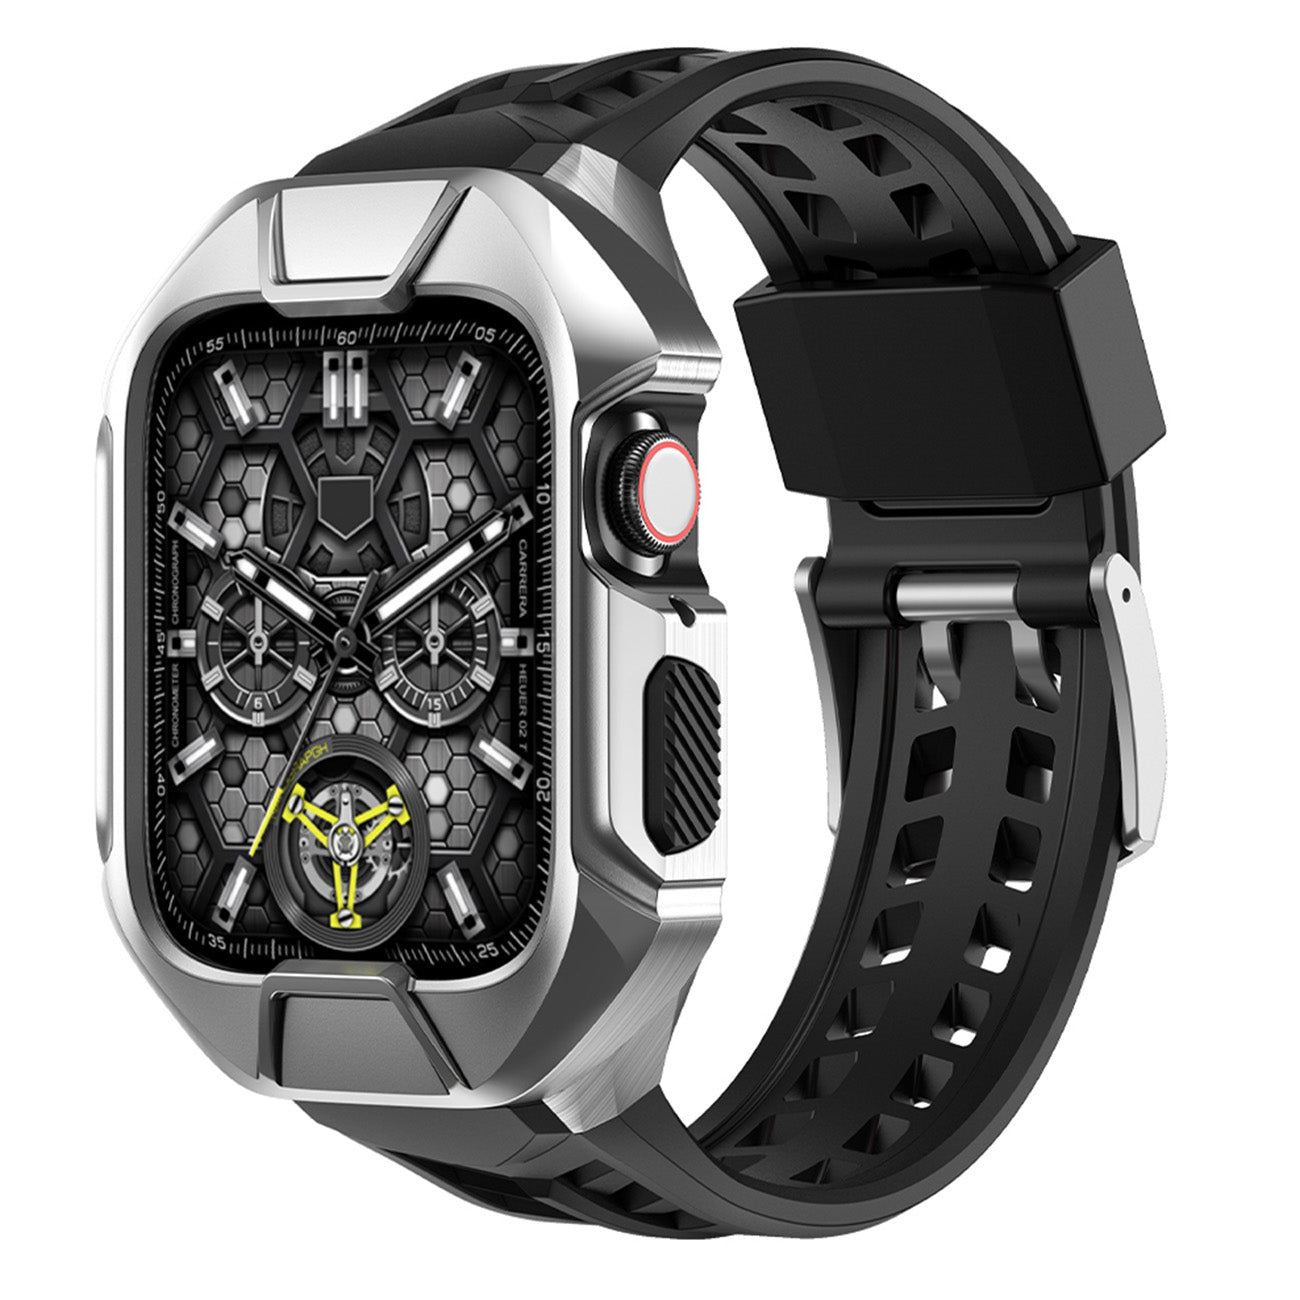 Kingxbar CYF136 2in1 armored case for Apple Watch 9, 8, 7 (45 mm) made of stainless steel with a silver strap